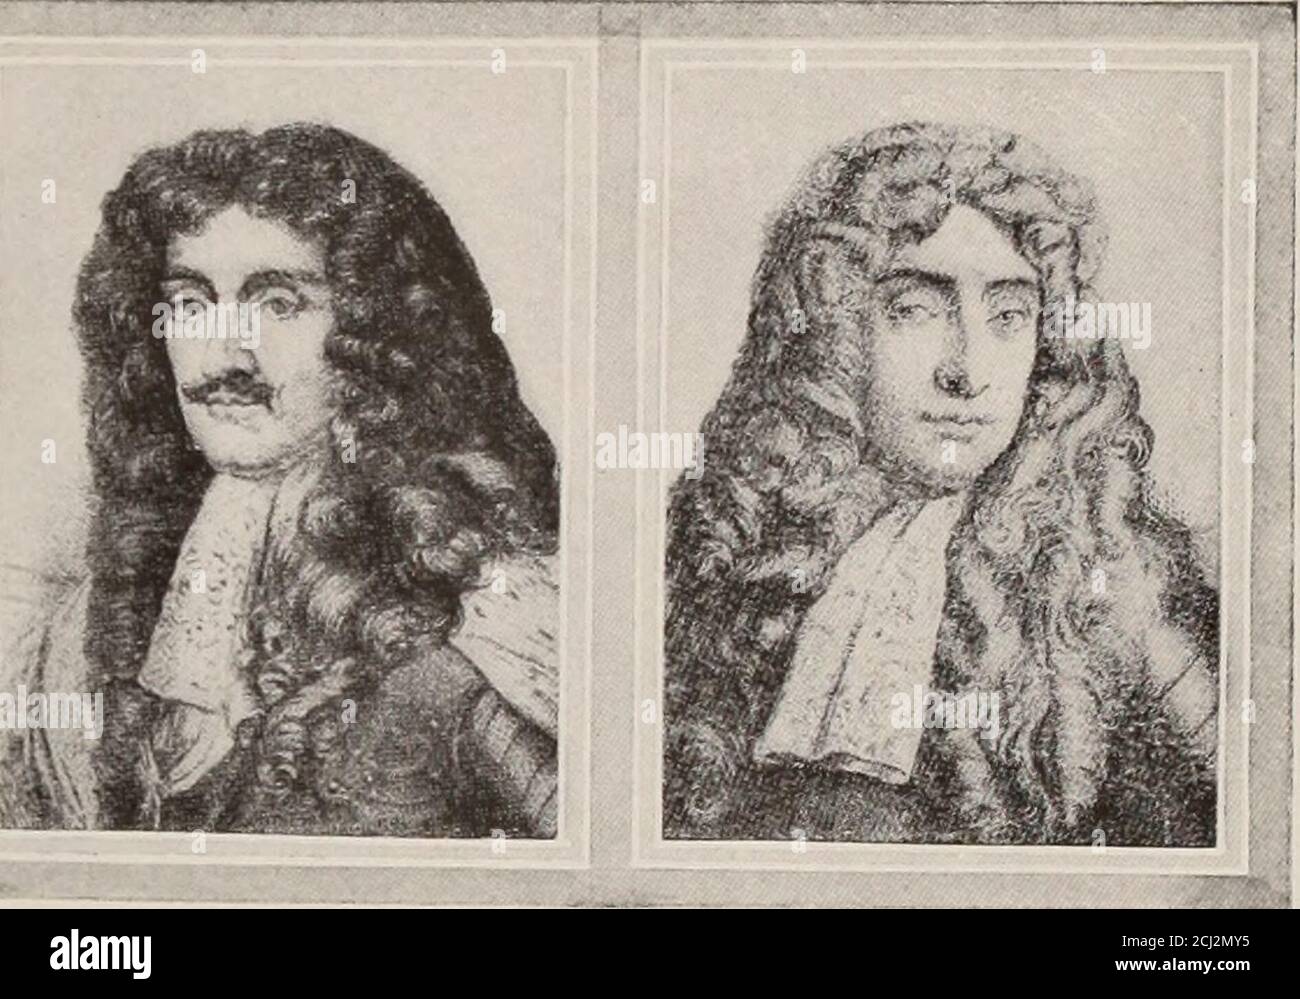 . Coronation souvenir . CHARLES I. CROMWELLBom 1600: crowned 1623; died 1649. Born 1599; Lord Protector 1653; died 1658. CHARLES II.Born 1630; crowned 1660; died 1685. JAMES II.Born 1633; crowned 1685; died 1701. Present-day farmingrecognizes the neces-sity for a power whichis cheaper and betterin every respect thananimal power, windpower, water power, orsteam power. Withouta power of this nature,it is safe to say thatfarming would not beon as substantial abusiness basis to-dayas it is. When the gasolineengine was offered thefarmer, he realized at once that this was the power he had long been Stock Photo